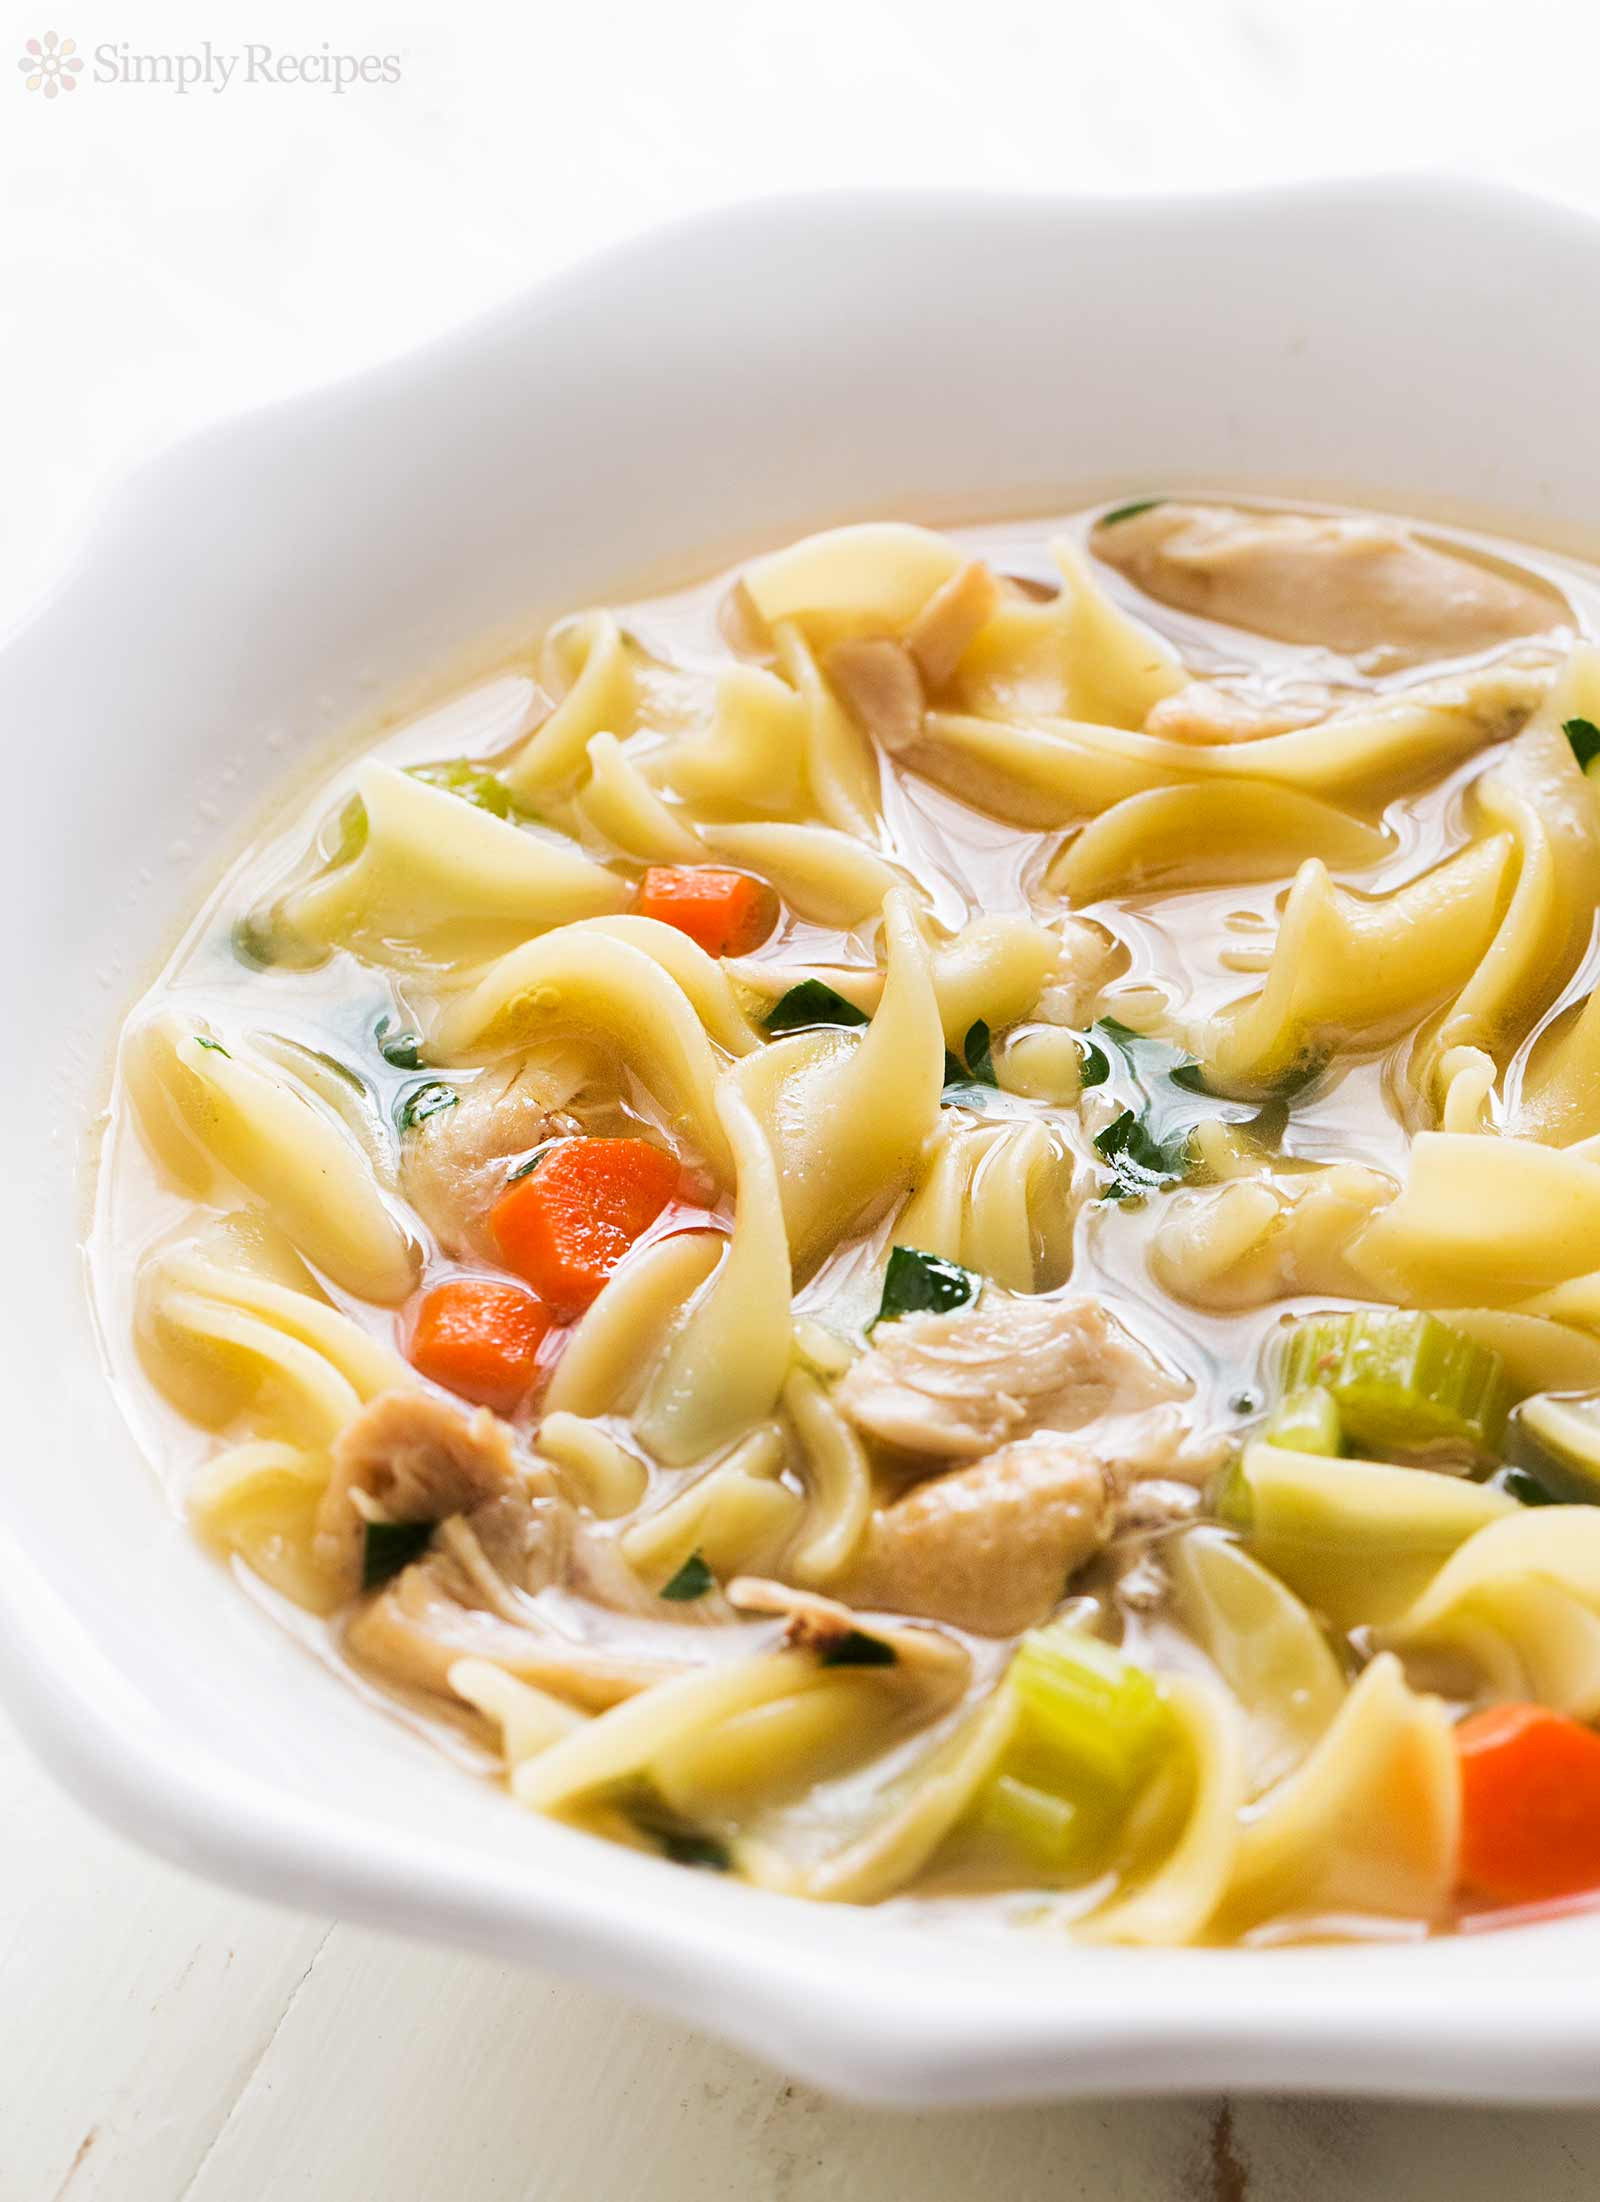 Best Chicken Noodle Soup Recipe
 Homemade Chicken Noodle Soup Recipe